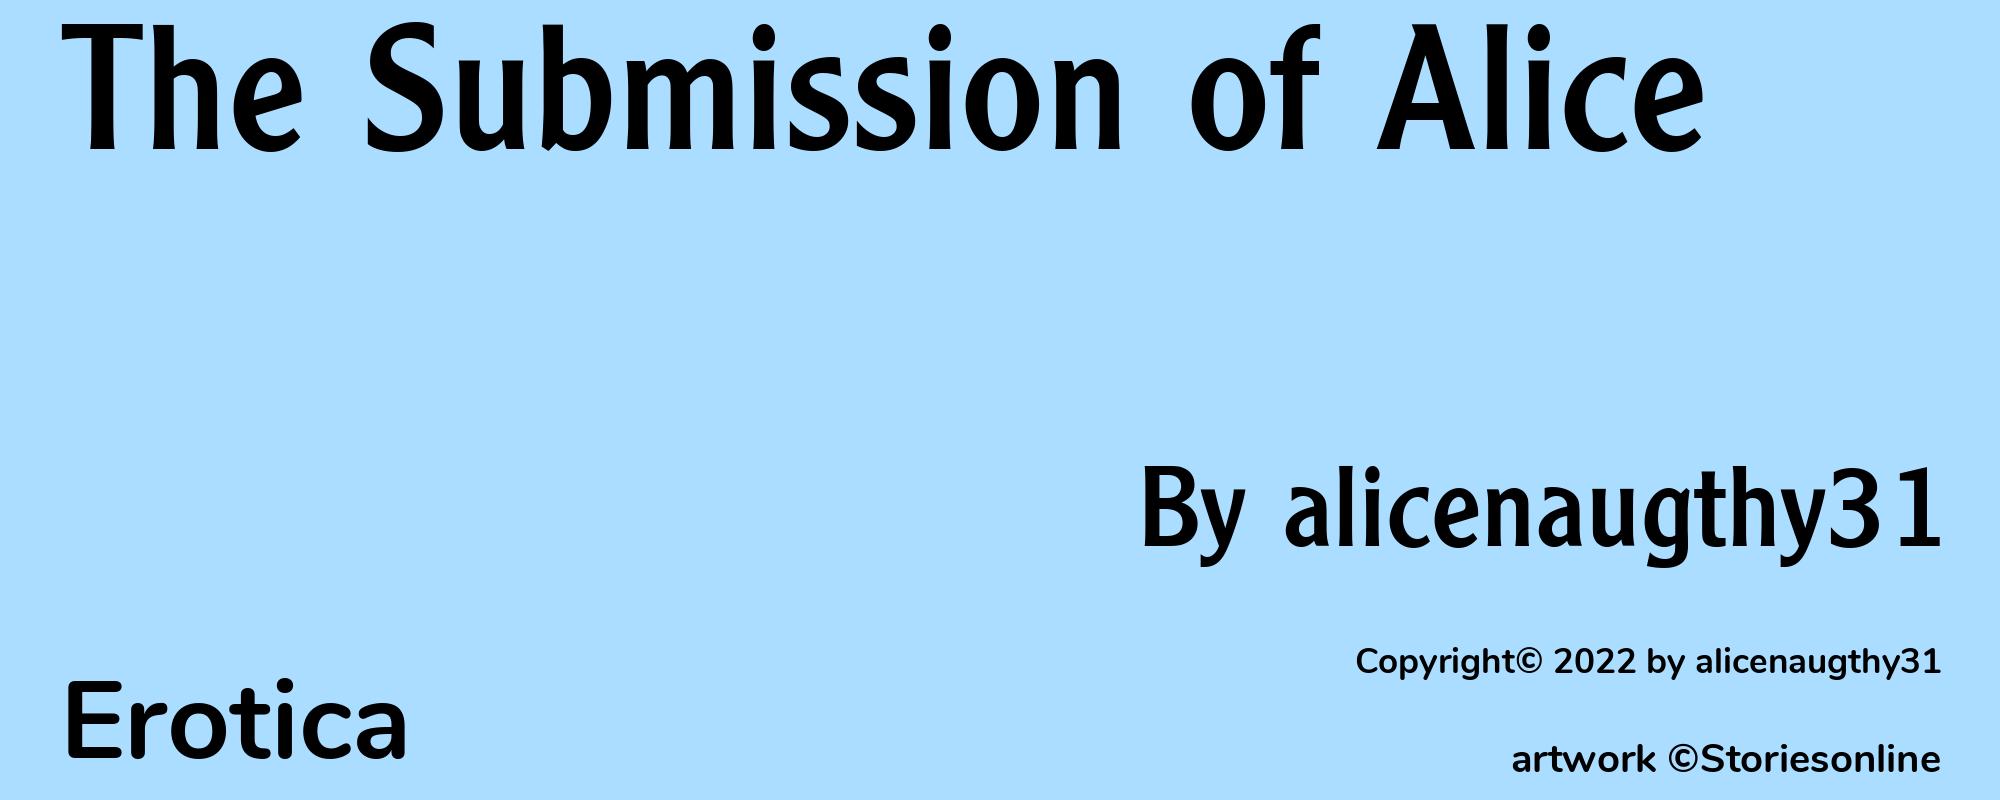 The Submission of Alice - Cover